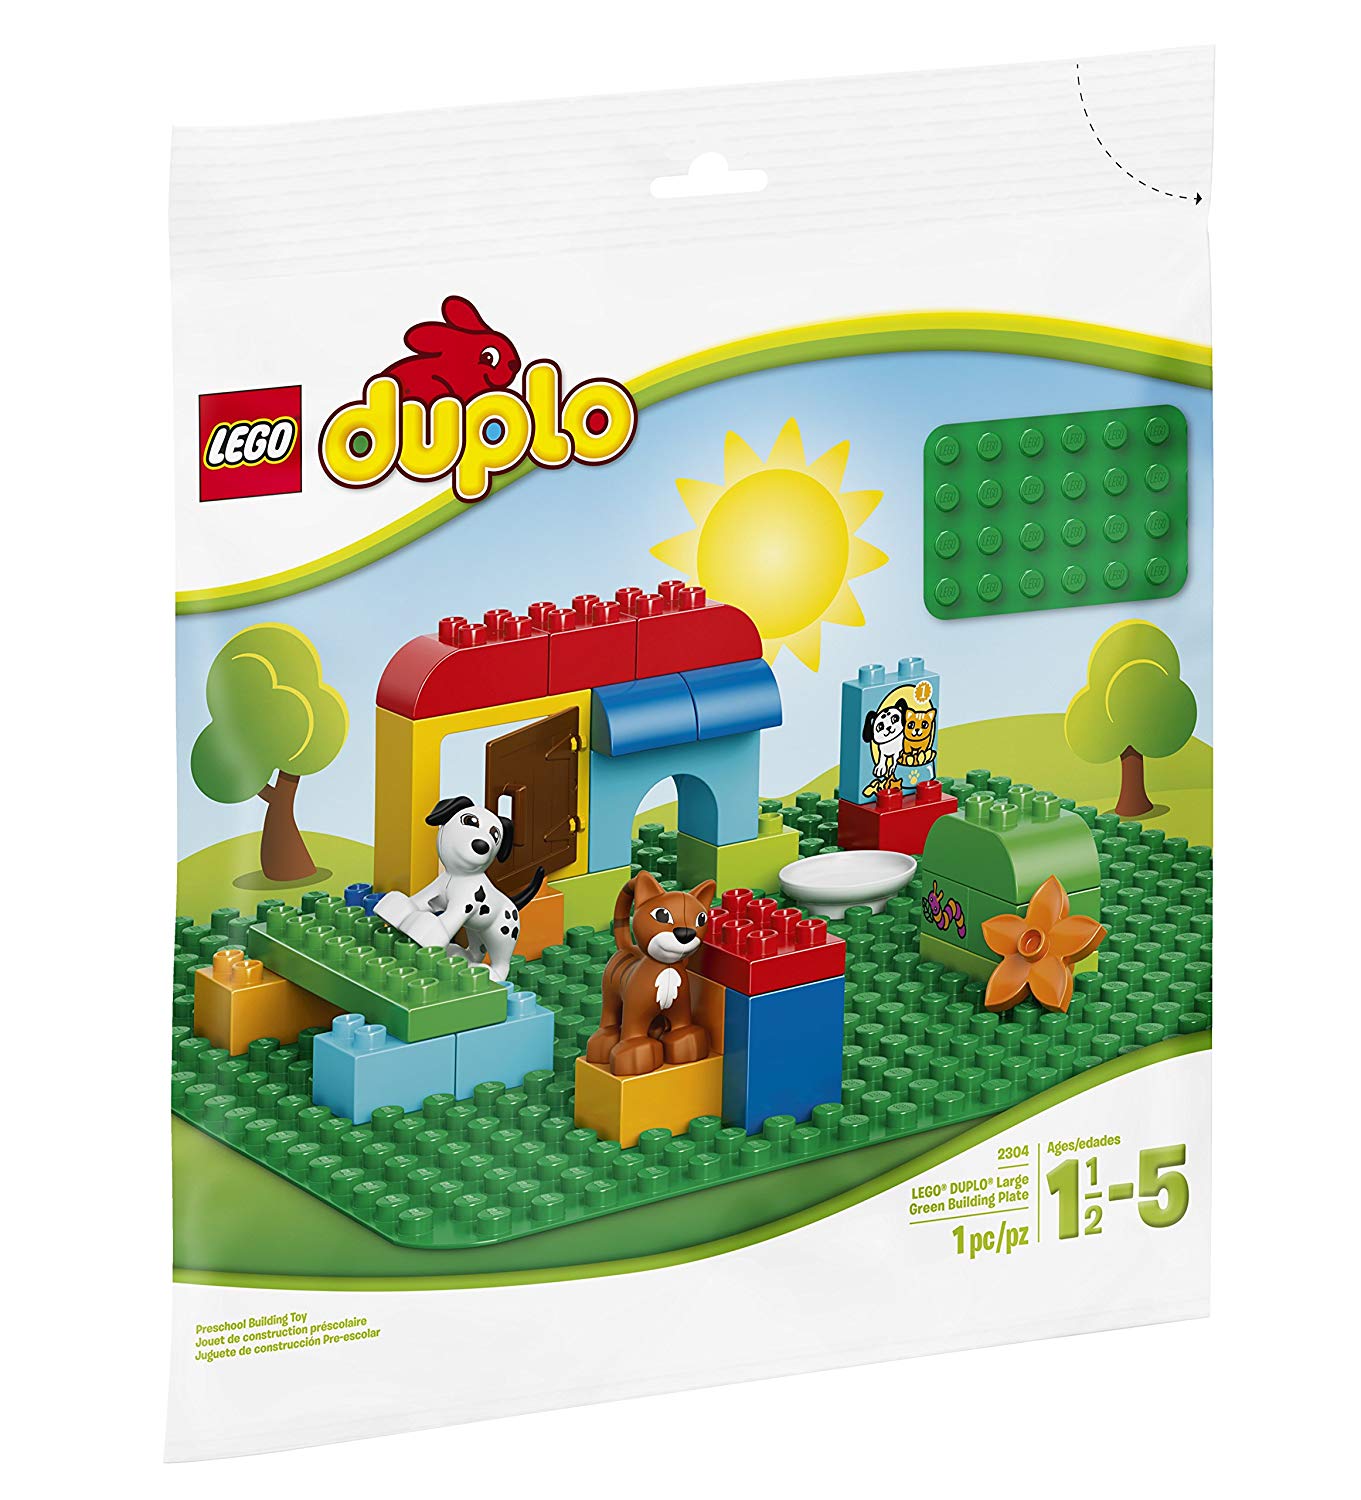 Lego Duplo My First Large Green Building Plate 2304 Building Kit